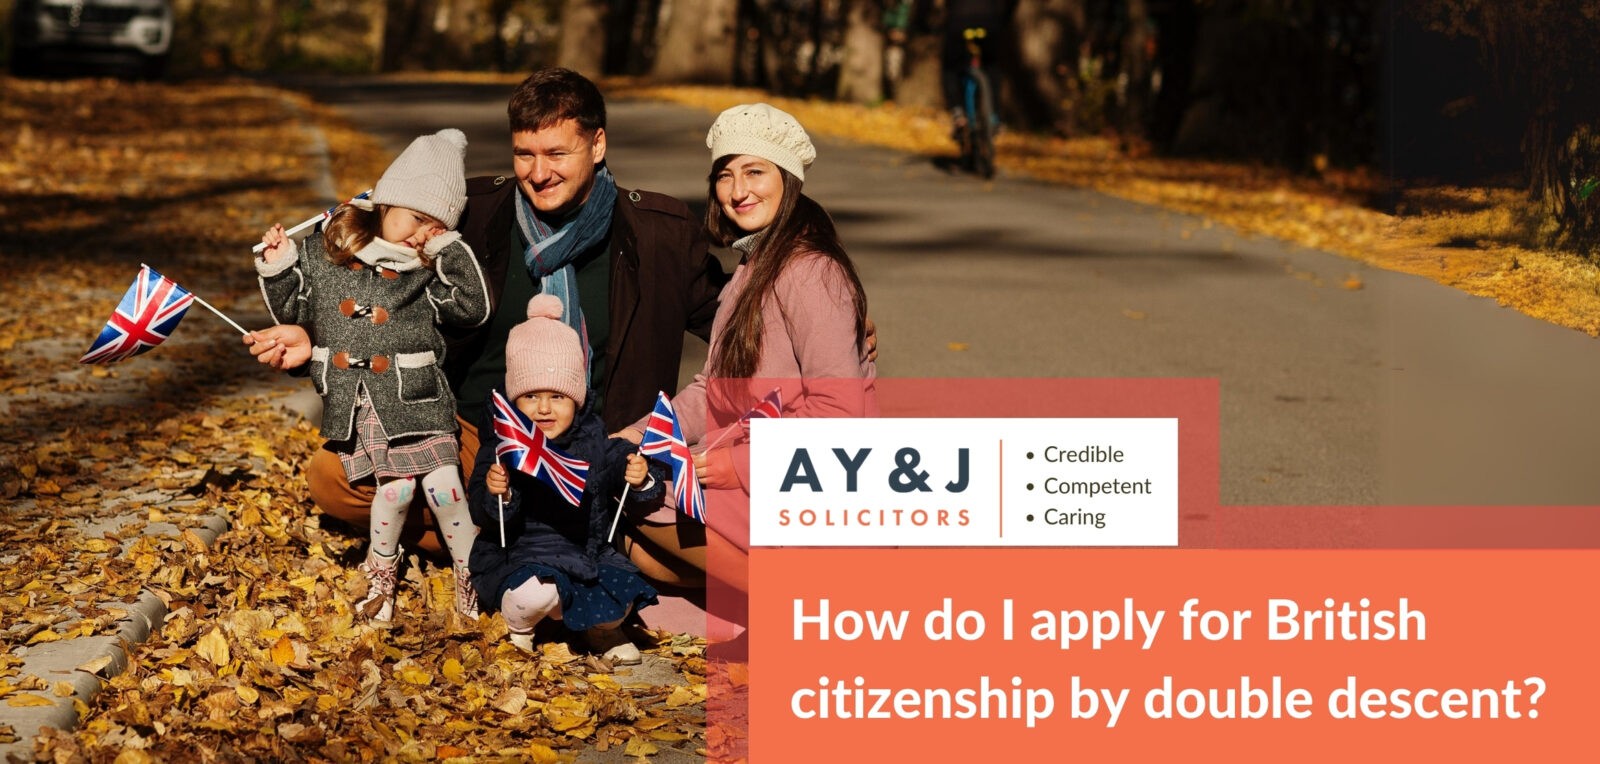 How do I apply for British citizenship by double descent?